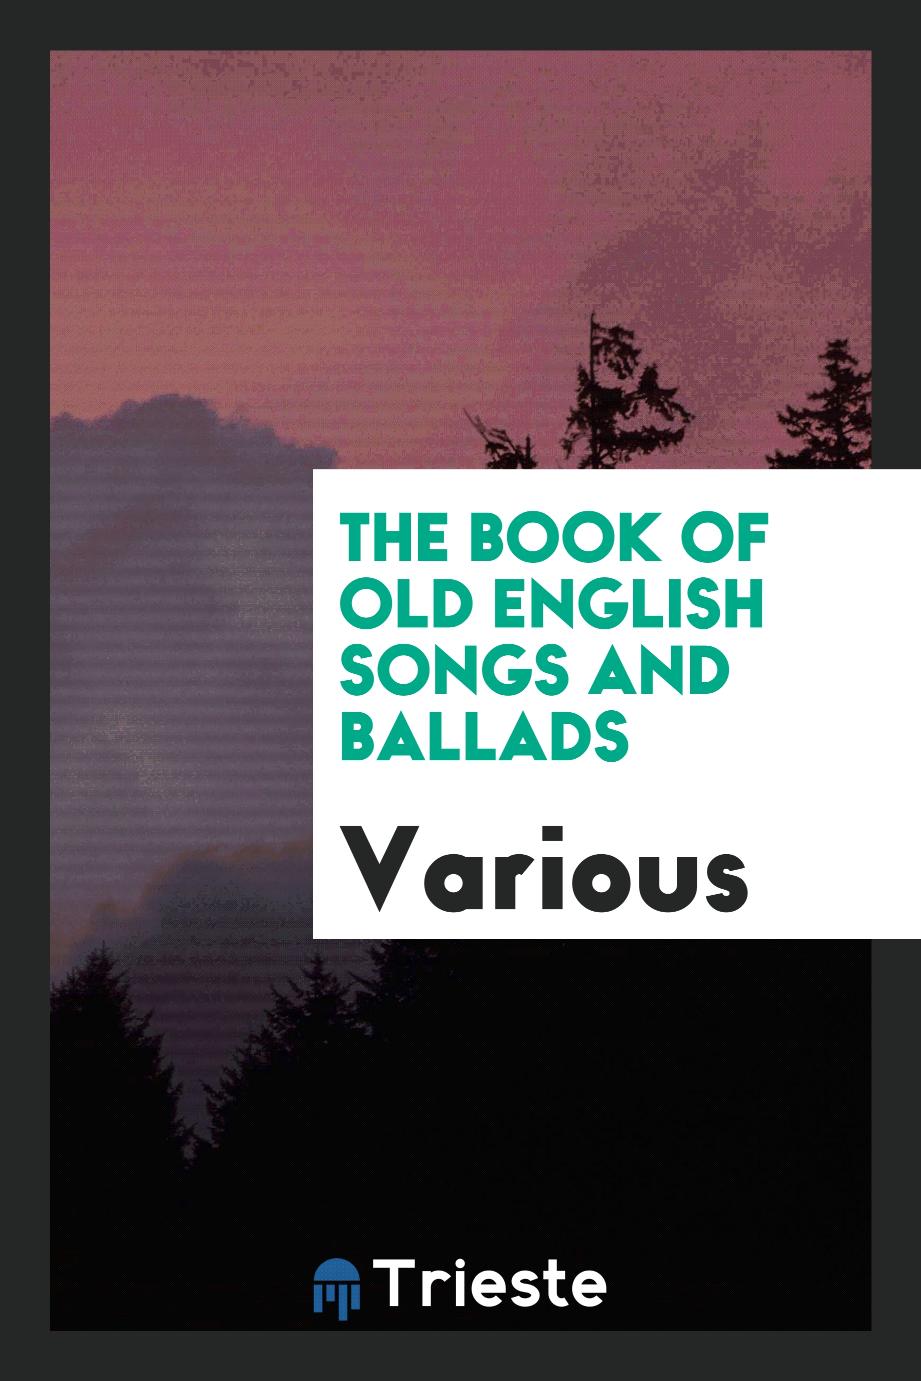 The Book of old English songs and ballads